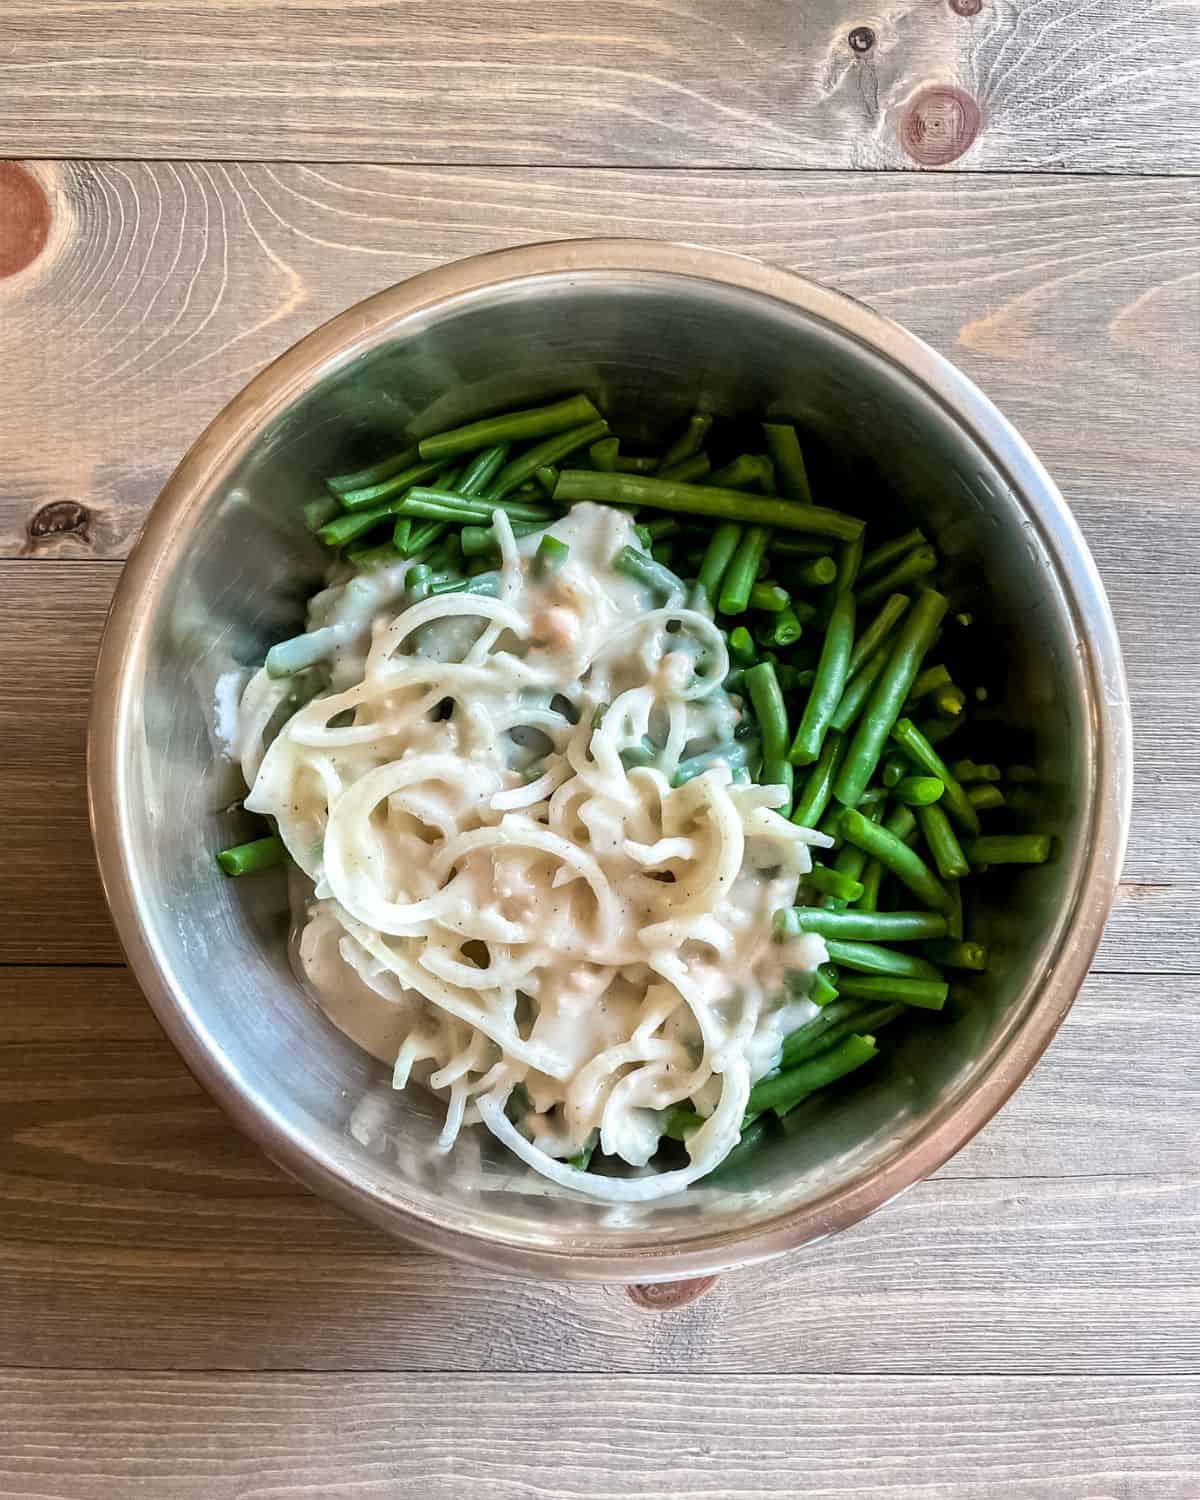 Blanched green beans and cream of chicken soup mixture in a bowl.